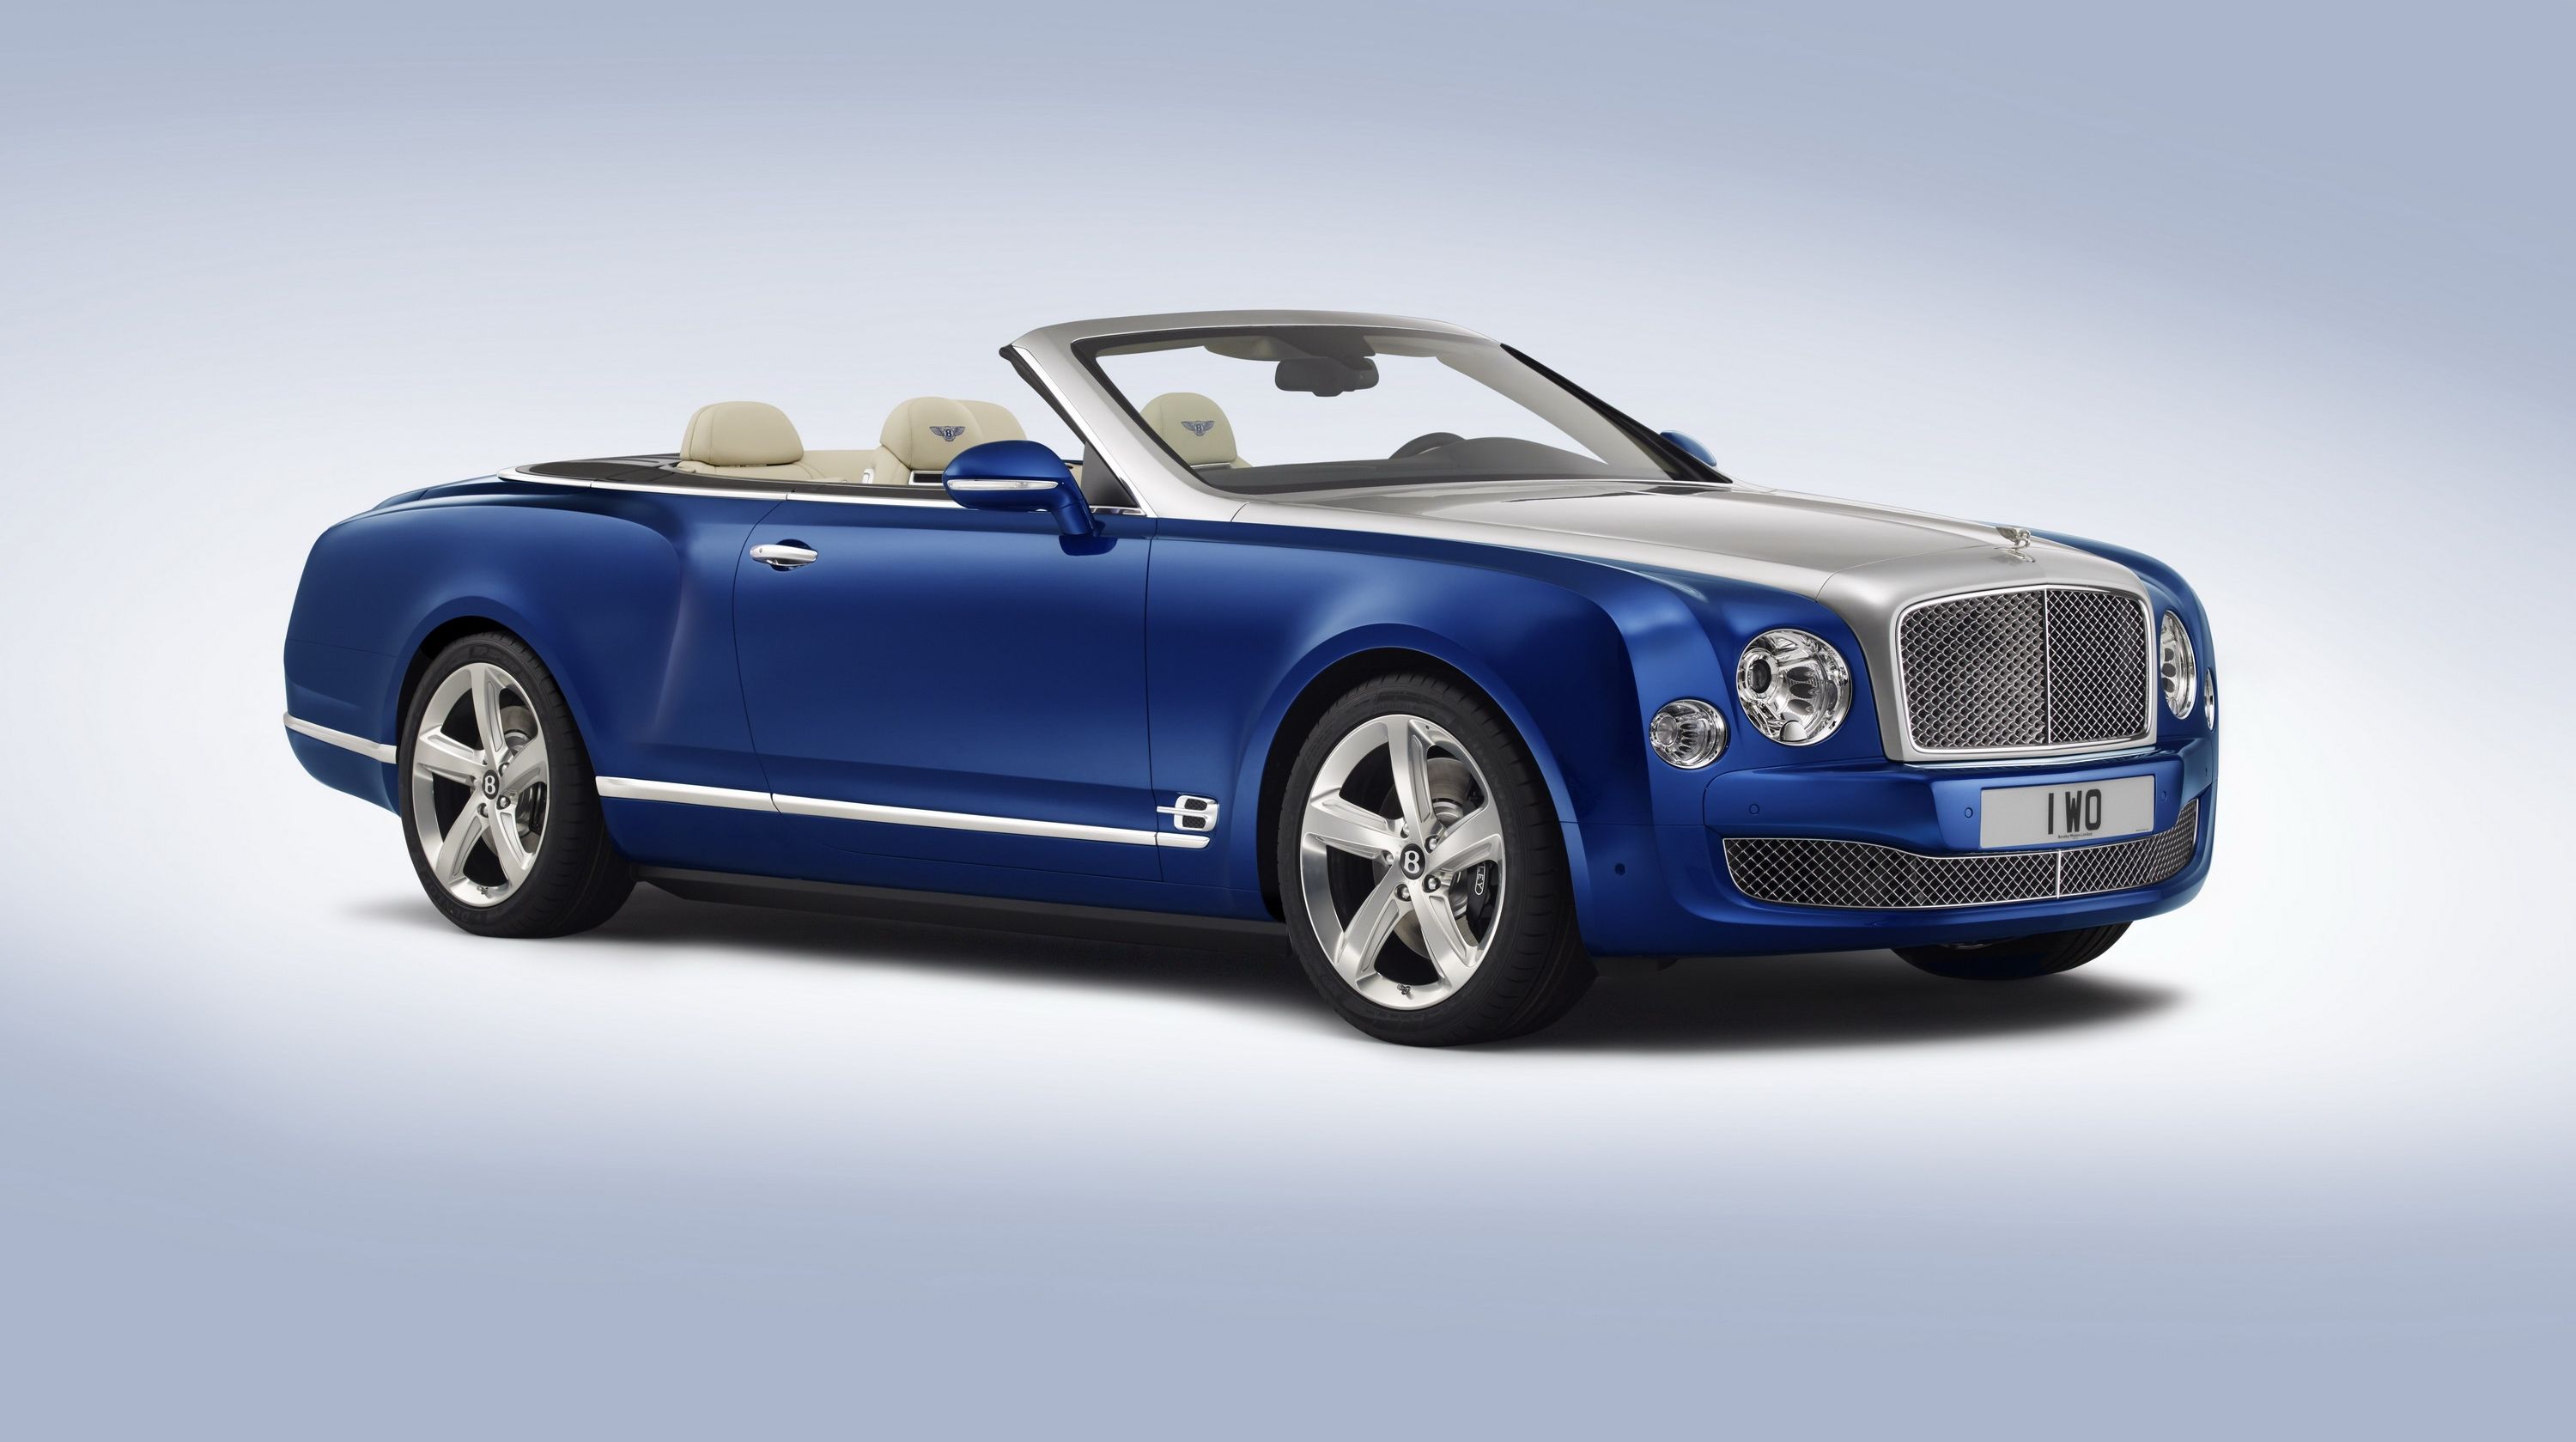  It looks like Bently is well on its way to making a Mulsane convertible, but first, this Grand Convertible Concept.